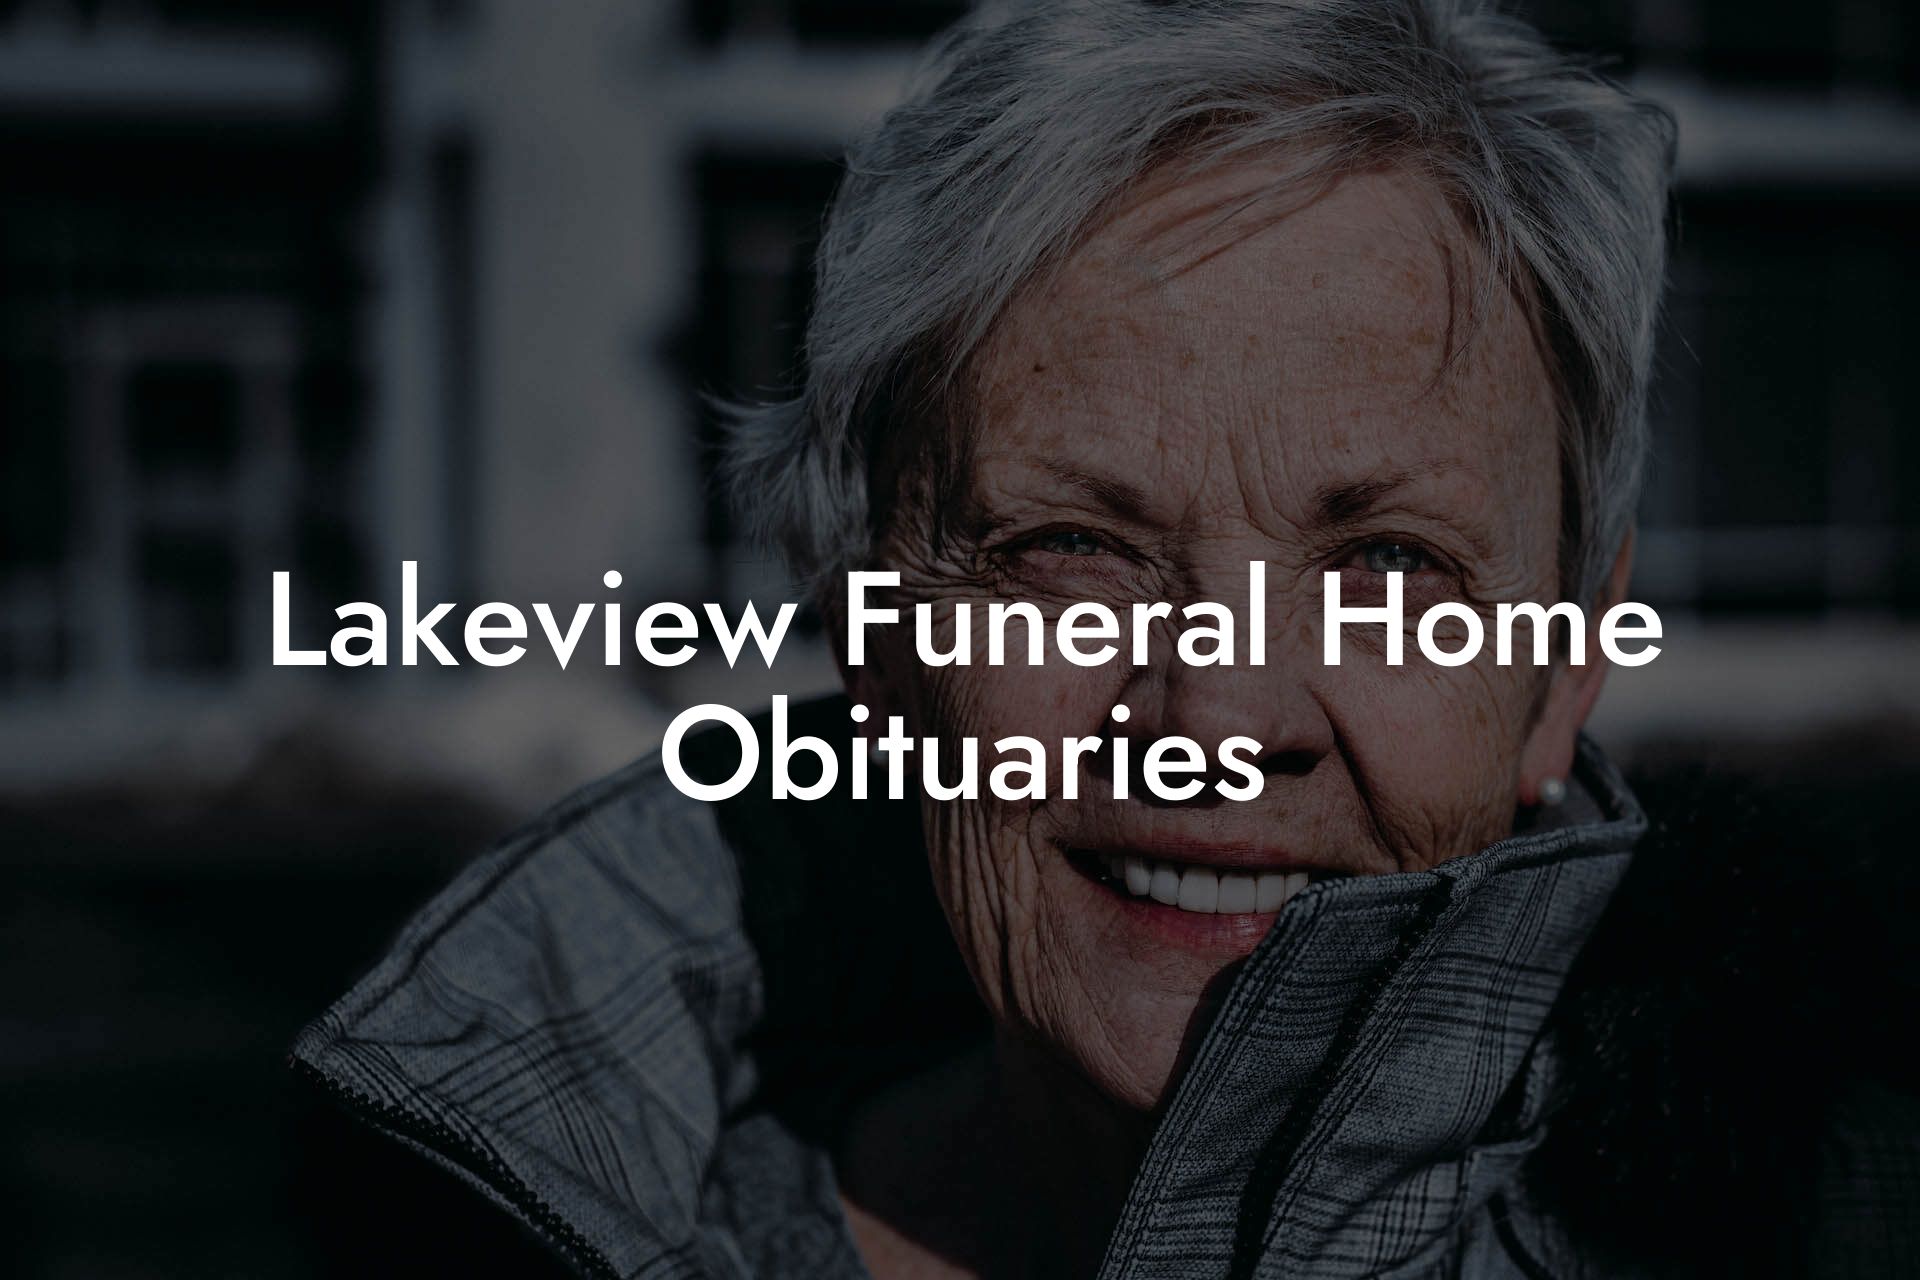 Lakeview Funeral Home Obituaries